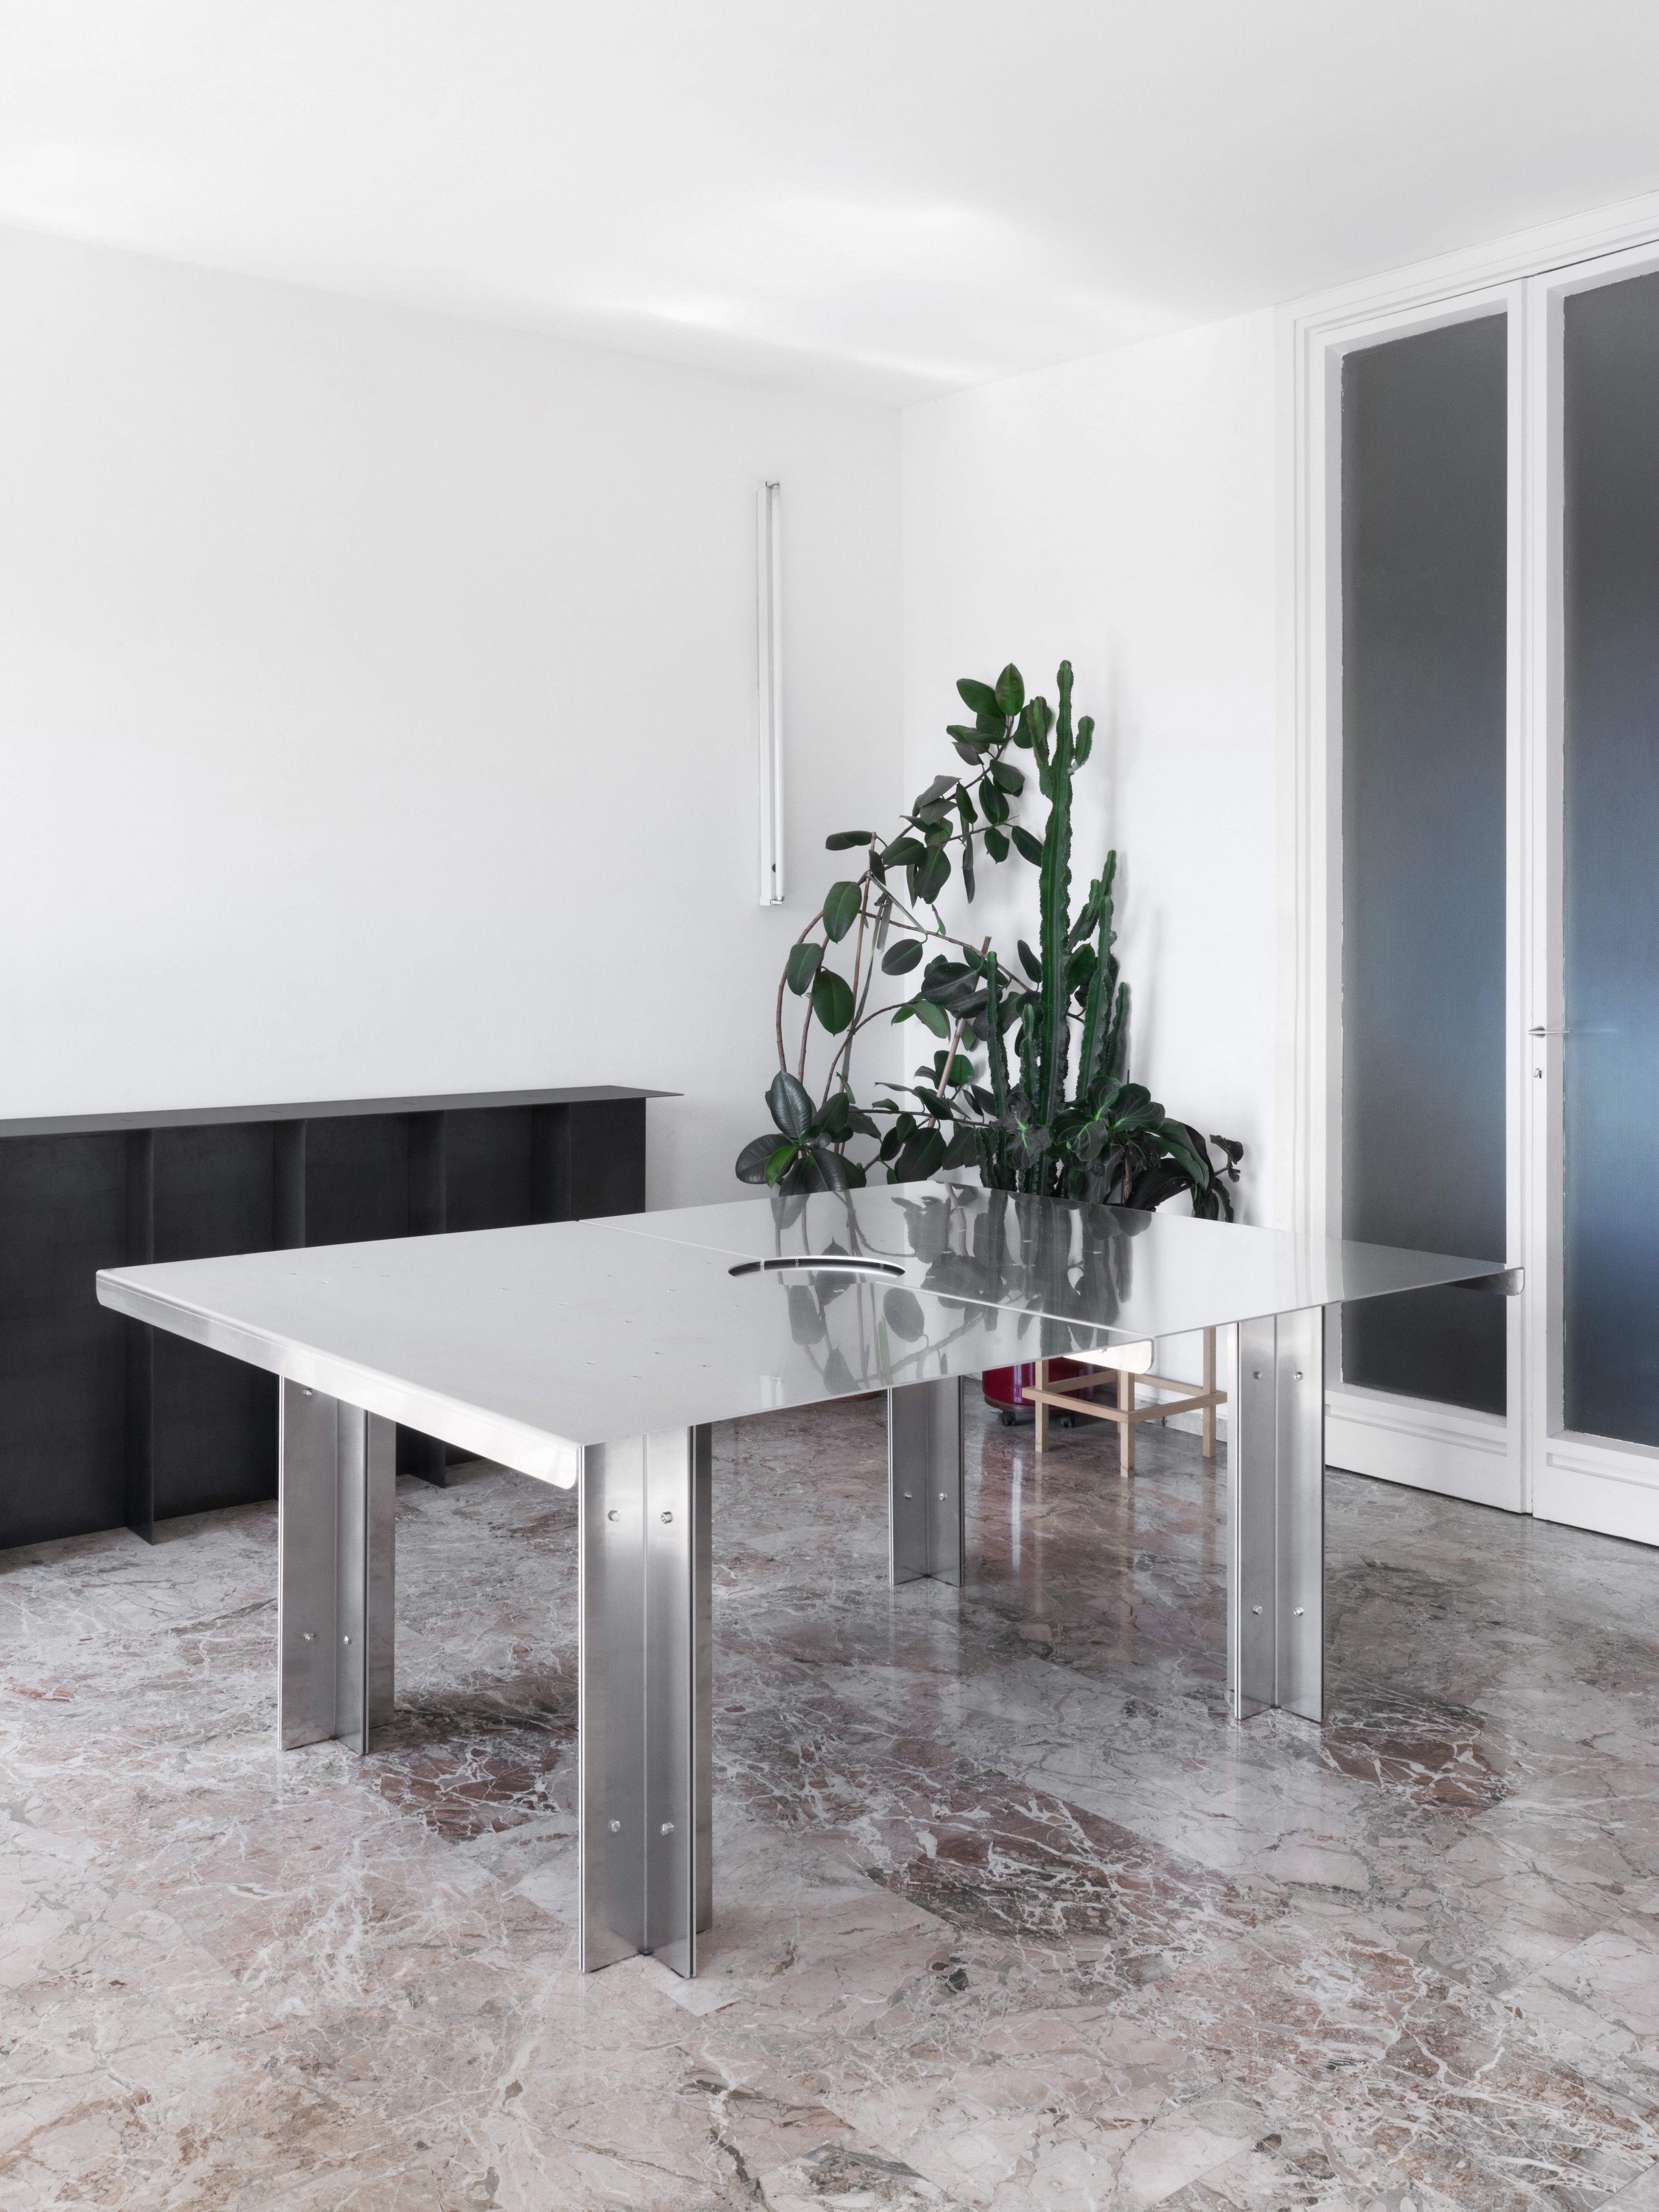 NMFD dining table by NM3
Dimensions: W 150 x D 190 x H 75 cm
Materials: raw aluminum

4mm to 10mm folded raw aluminum and dry joint dining table.

NM3 is an office for architecture and design based in Milan run by Nicolò Ornaghi, Delfino Sisto